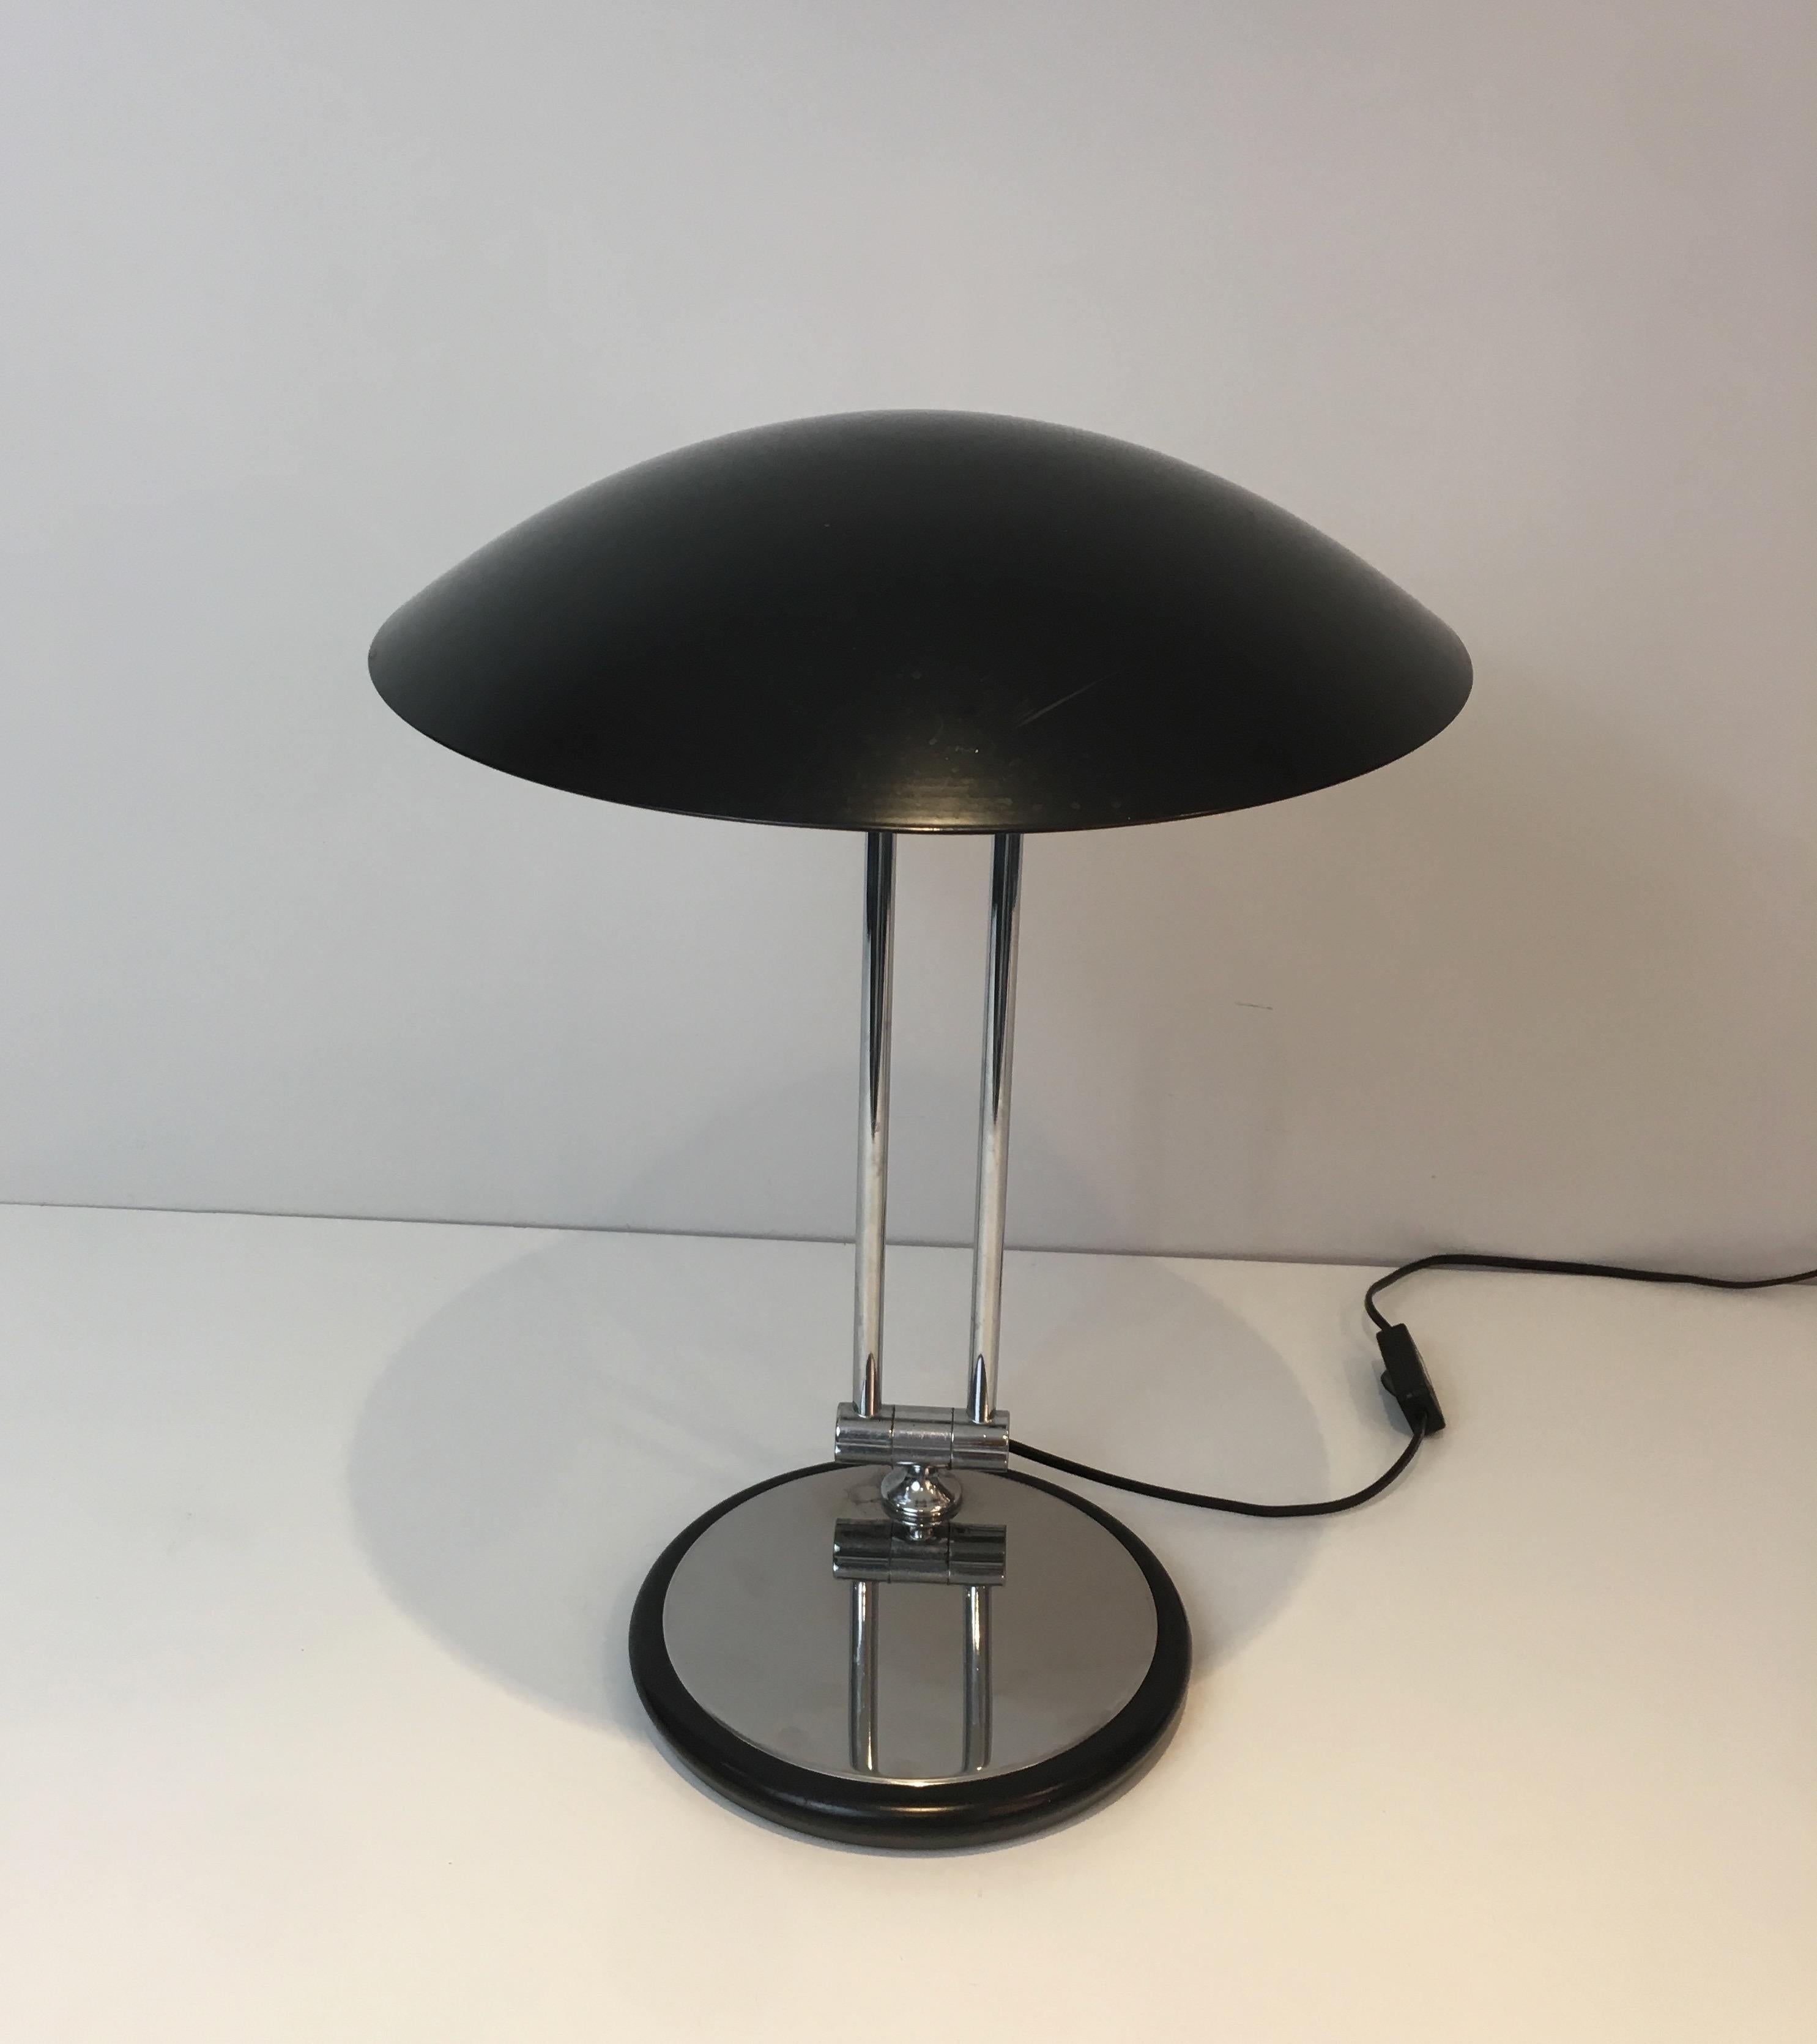 Design Adjustable Chrome and Black Lacquered Desk Lamp, circa 1970 For Sale 2